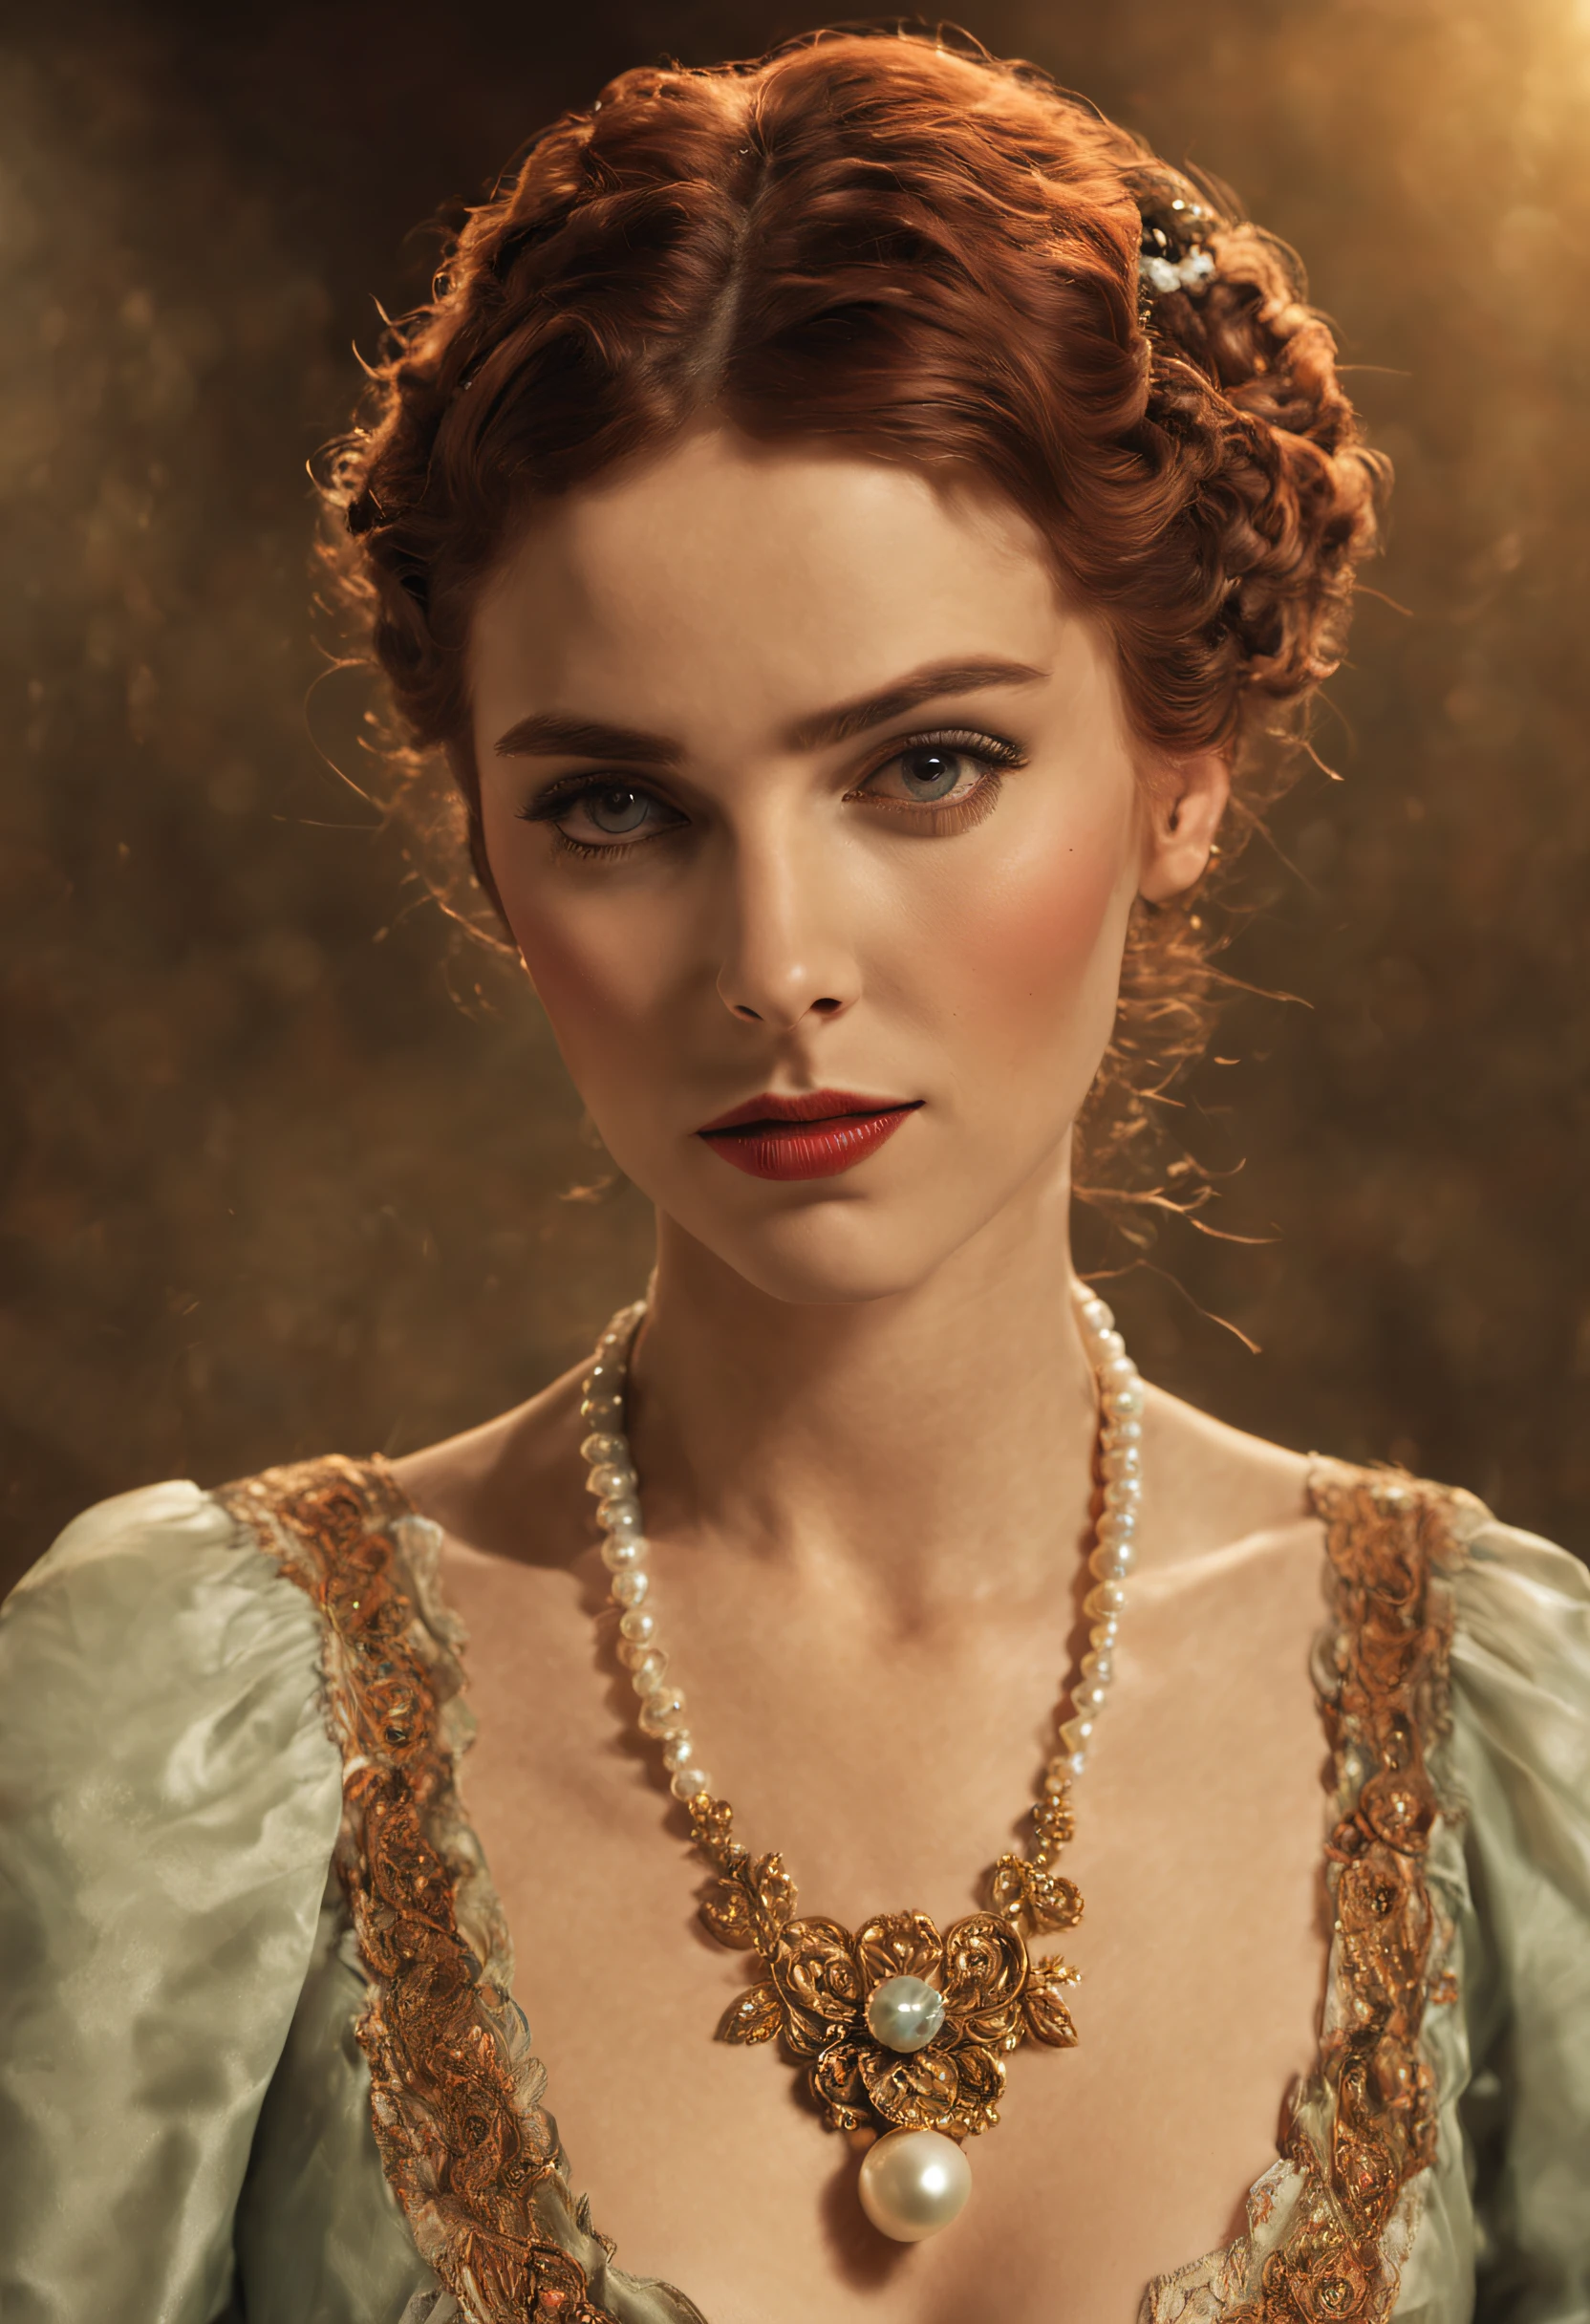 Arafed photo of a woman with a necklace and a pearl necklace, Colouring, Colouring, uma colorful photo, a beautiful victorian woman, Coloration 1 9 0 4 photo, inspired by Ada Gladys Killins, colorful photo, hand- (Staring at me:1.20), (Front view:1.40), (warm colours:1.15), Colouring, Colouring, inspired by White Oakley, lola dupre, 1 9 2 0 s cinematic hairstyle filmed in a movie scene, swirly vibrant colors, highy detailed, Presented at Cinemascope, creating a moody atmosphere. fancy, dramatic photo, dynamic photo, whole body view, Fundo highy detailed, ultra-realistic, 8k, (Realistic:1.3), posters, details Intricate, painting-like \(Craftsmanship\), (blackquality hair:1.15), (Climatic face:1.30), ((master part,best qualityer)), ((Cinematic light)), hyperealist, fearsome, fancy sombria (dark shot:1.17), epic realistic, sunfaded, ((Neutral Colors)), artistry, (HDR:1.5), (Muted colours:1.2), hyperdetailed, (Artee station:1.5), cinemactic, warm lights, dramatic light, (details Intricate:1.1), complex background, (Rutkowski:0.8), (teal and orange:0.4), Um retrato feminino de um hyperdetailed no estilo de um dementador de Harry